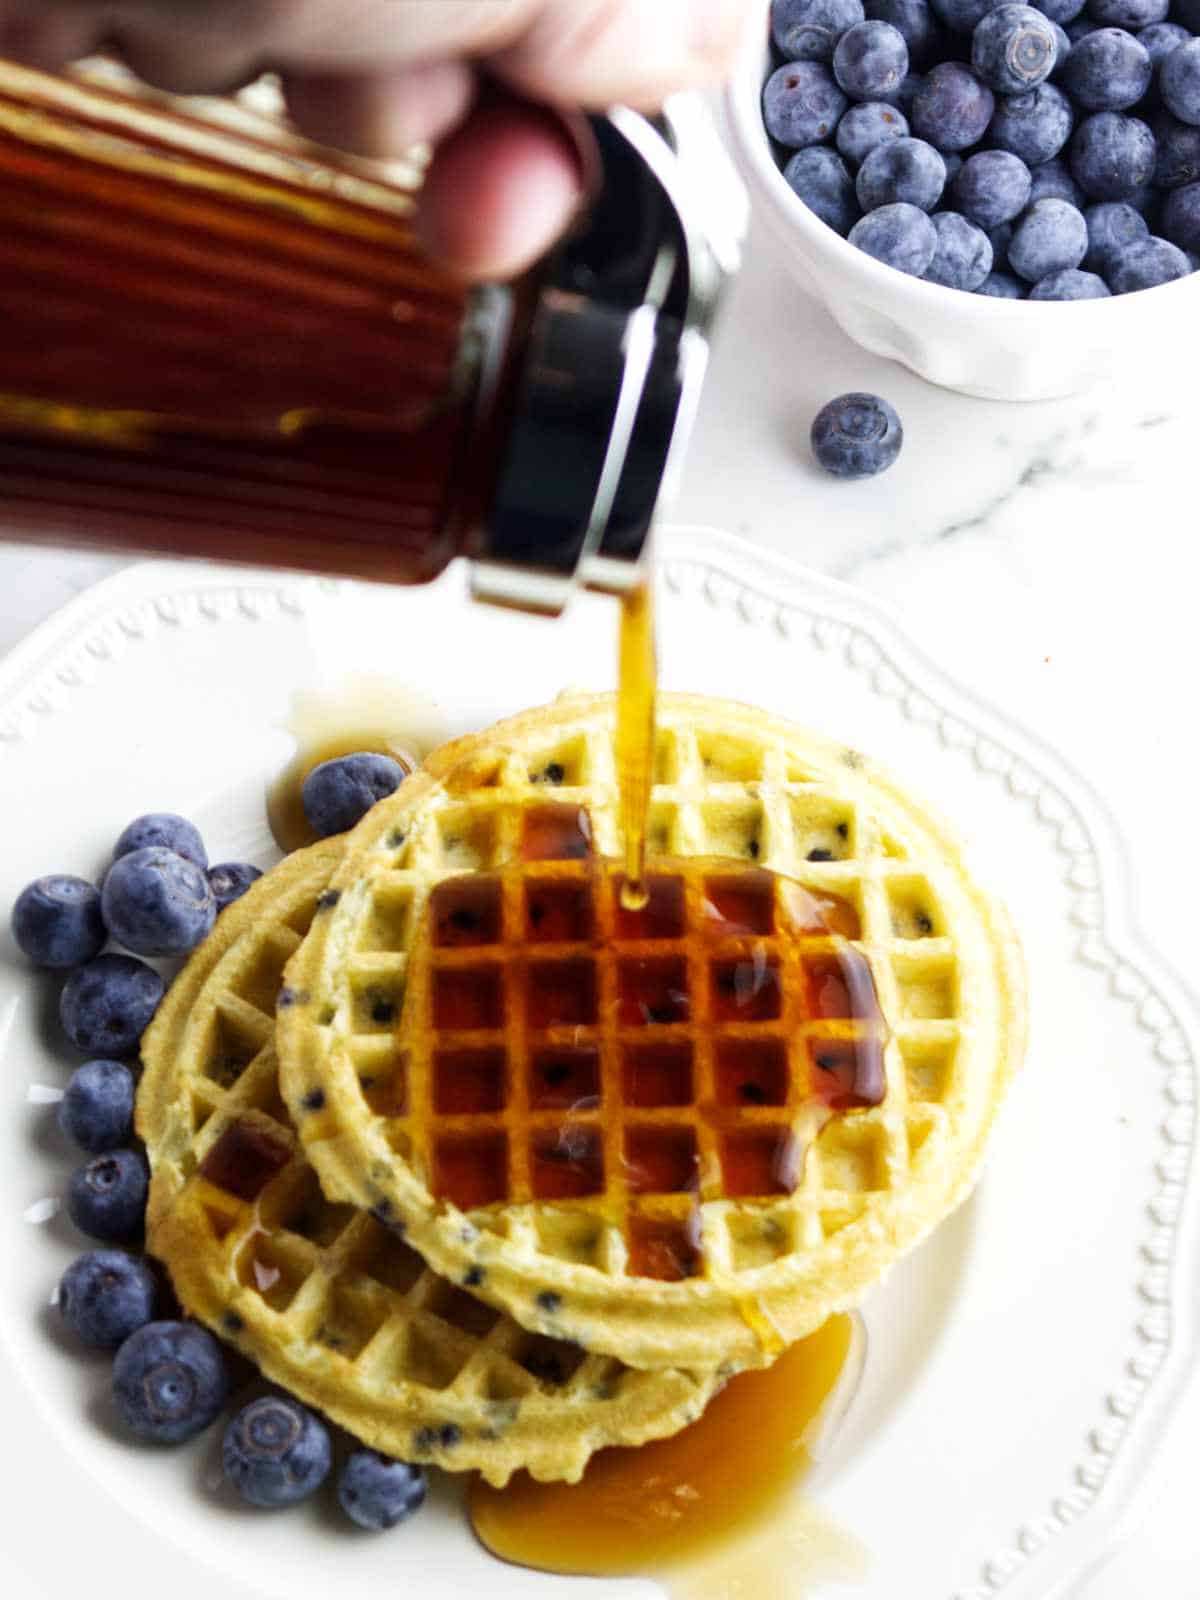 pouring maple syrup on plate of waffles.